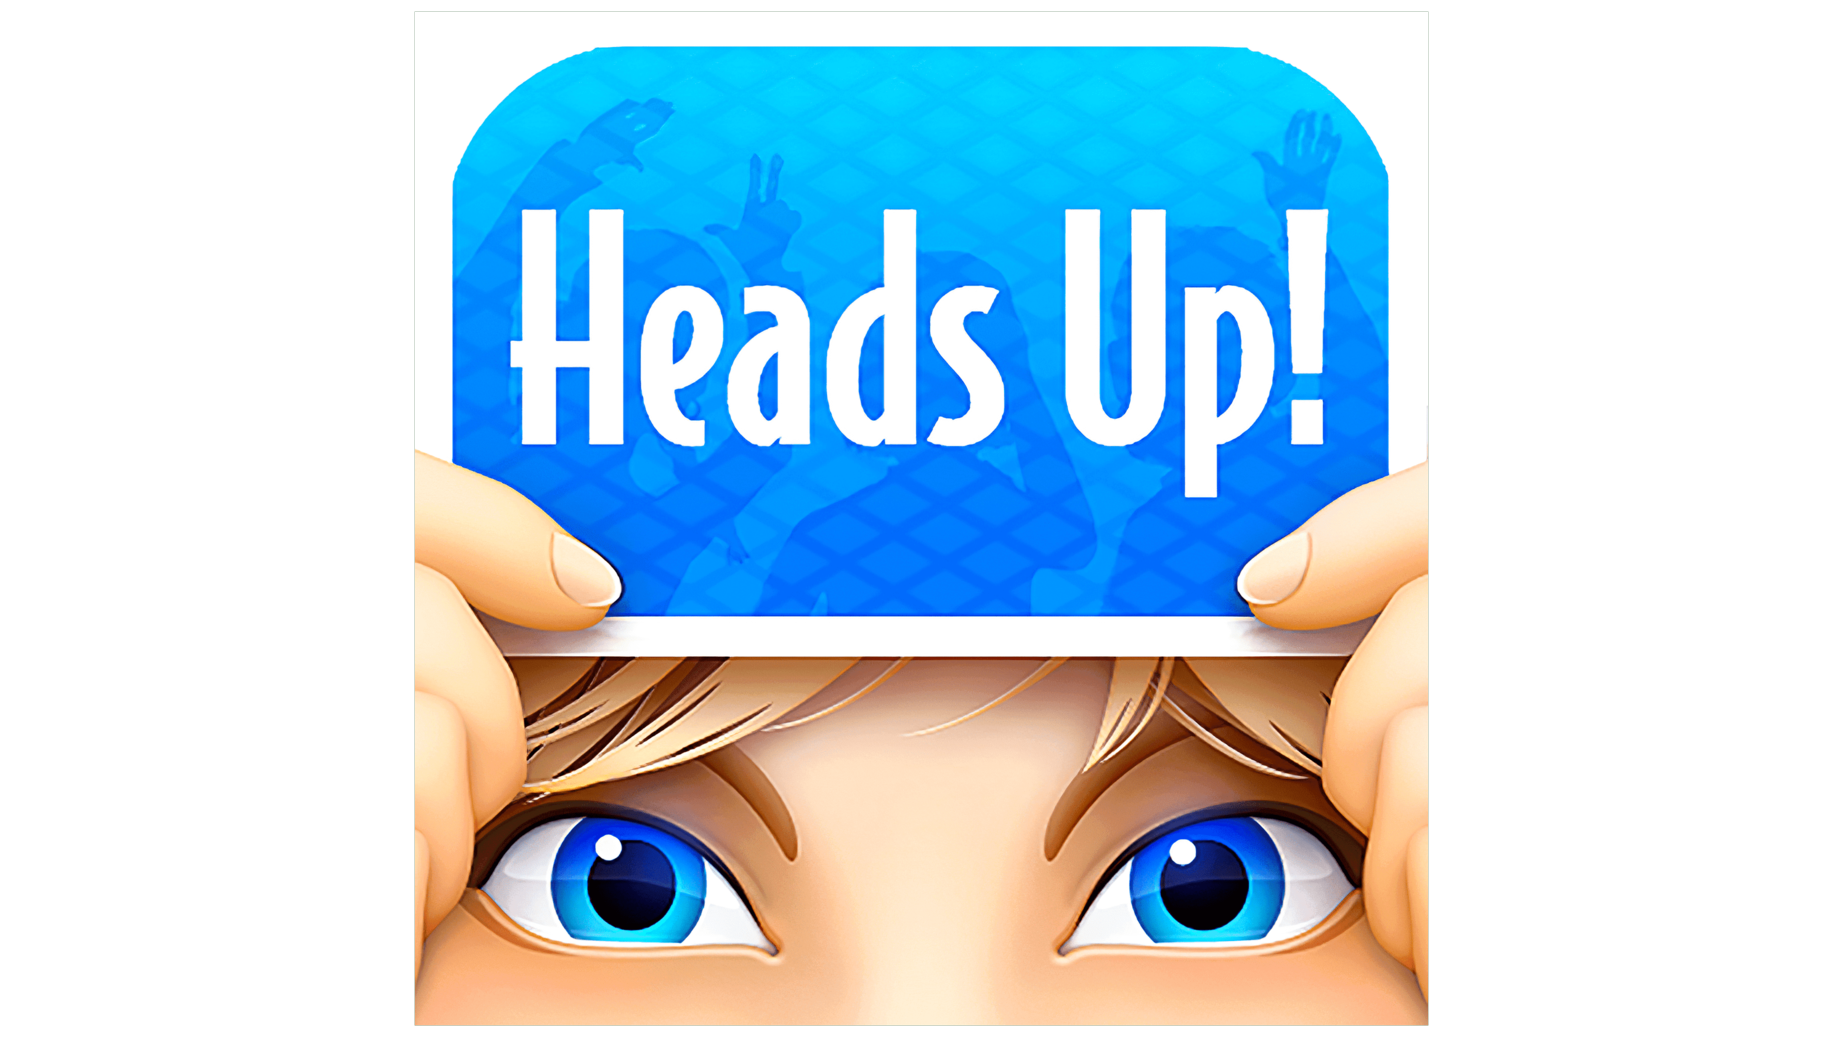 Heads up sign